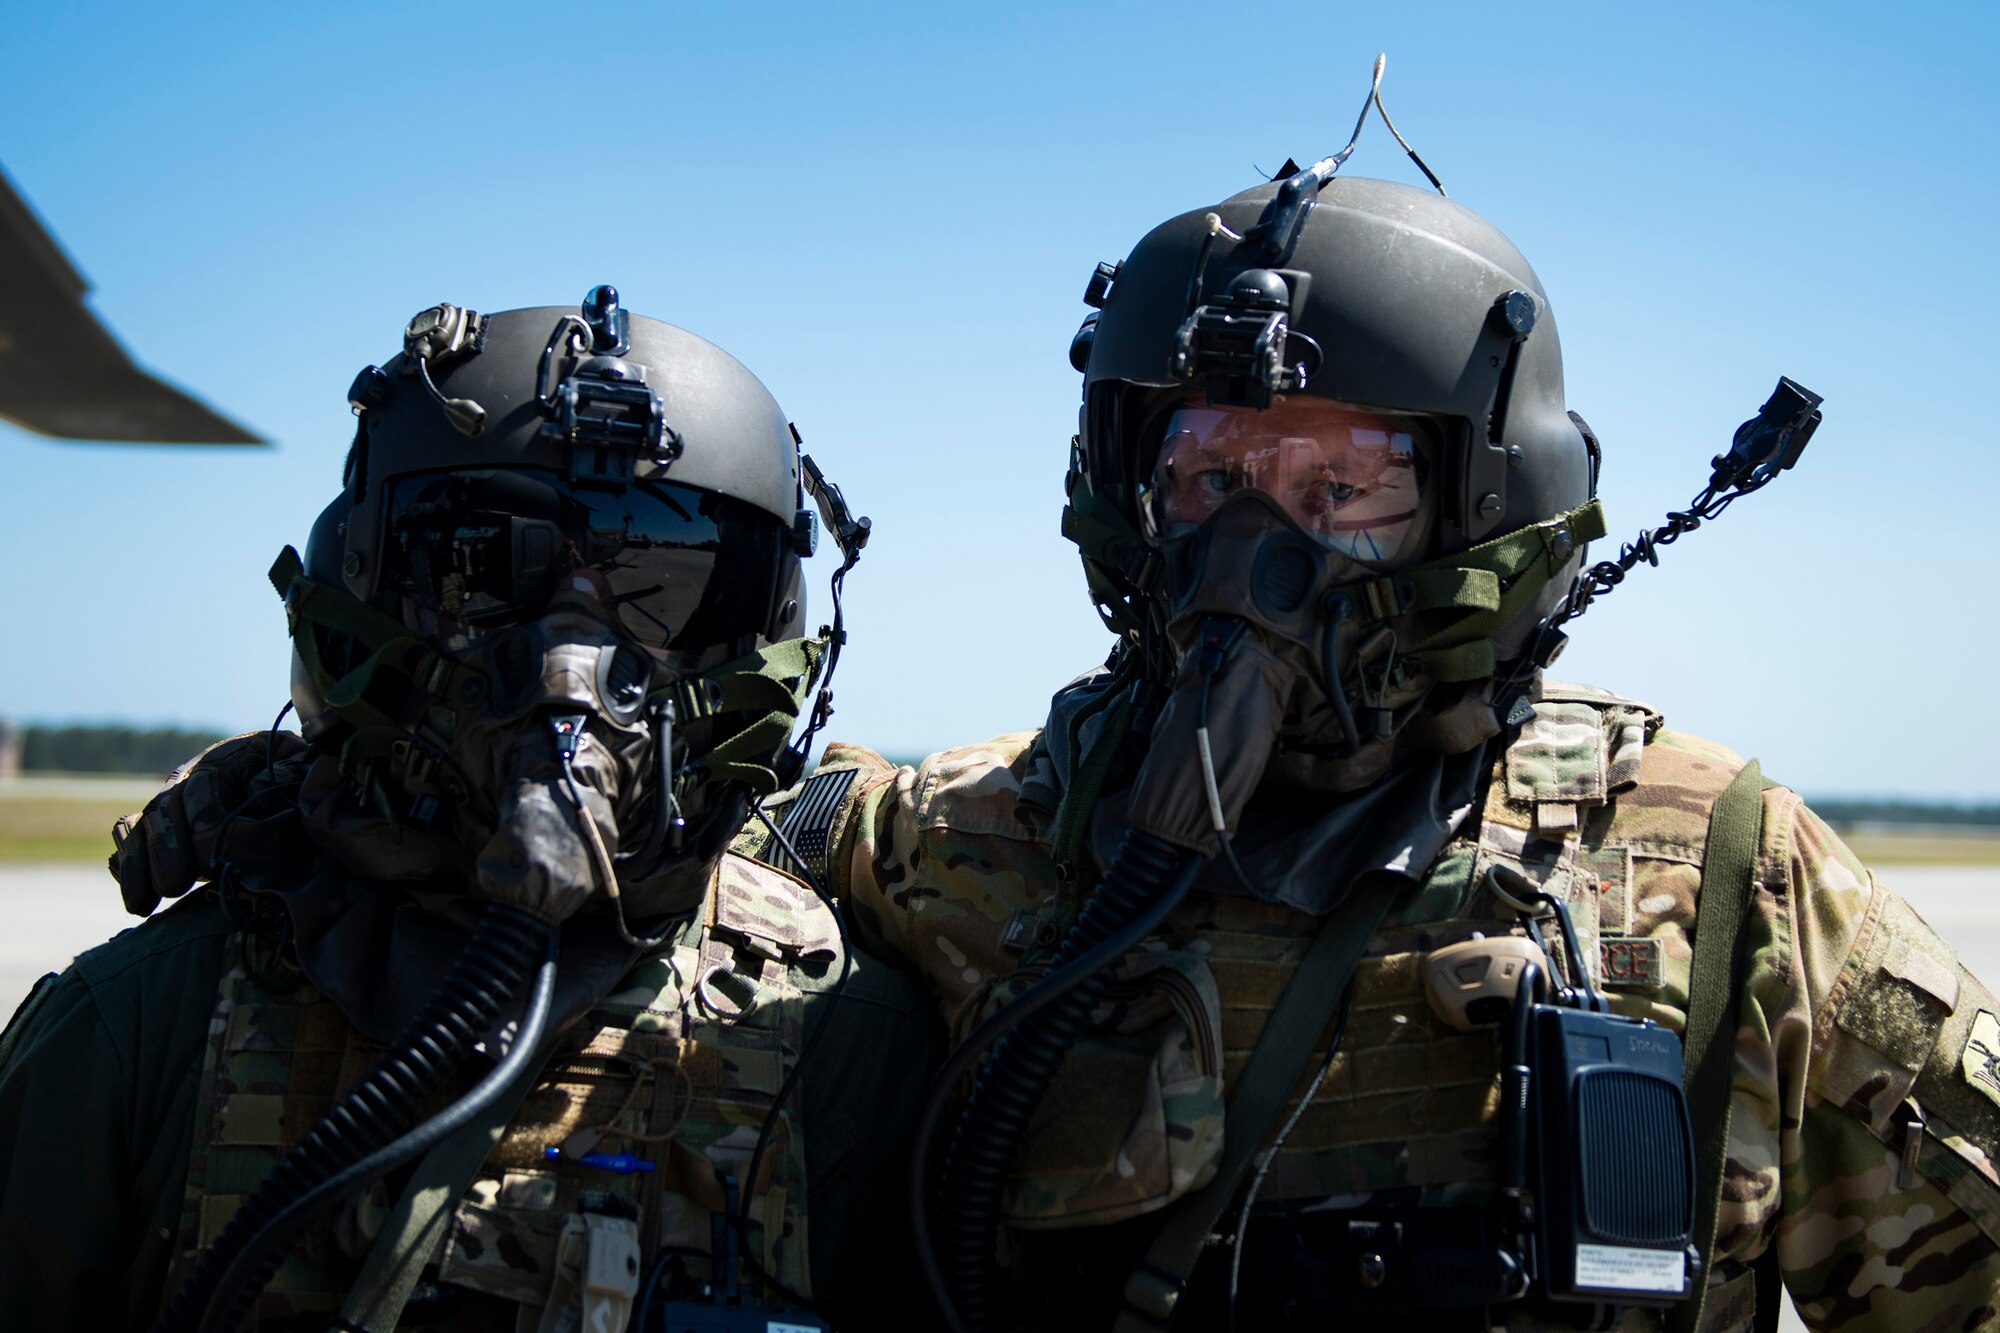 HH-60G Pave Hawk crew members from the 41st Rescue Squadron pose for a photo during a chemical, biological, radiological and nuclear exercise, March 28, 2017, at Moody Air Force Base, Ga. The Airmen were geared up in mission-oriented protective posture (MOPP) gear to simulate potential conditions they could face while deployed in austere environments. While in MOPP gear, Airmen have to deal with claustrophobic conditions, impaired communication and battle the constant threat of heat exhaustion, while completing the mission. (U.S. Air Force photo by Airman 1st Class Erick Requadt)